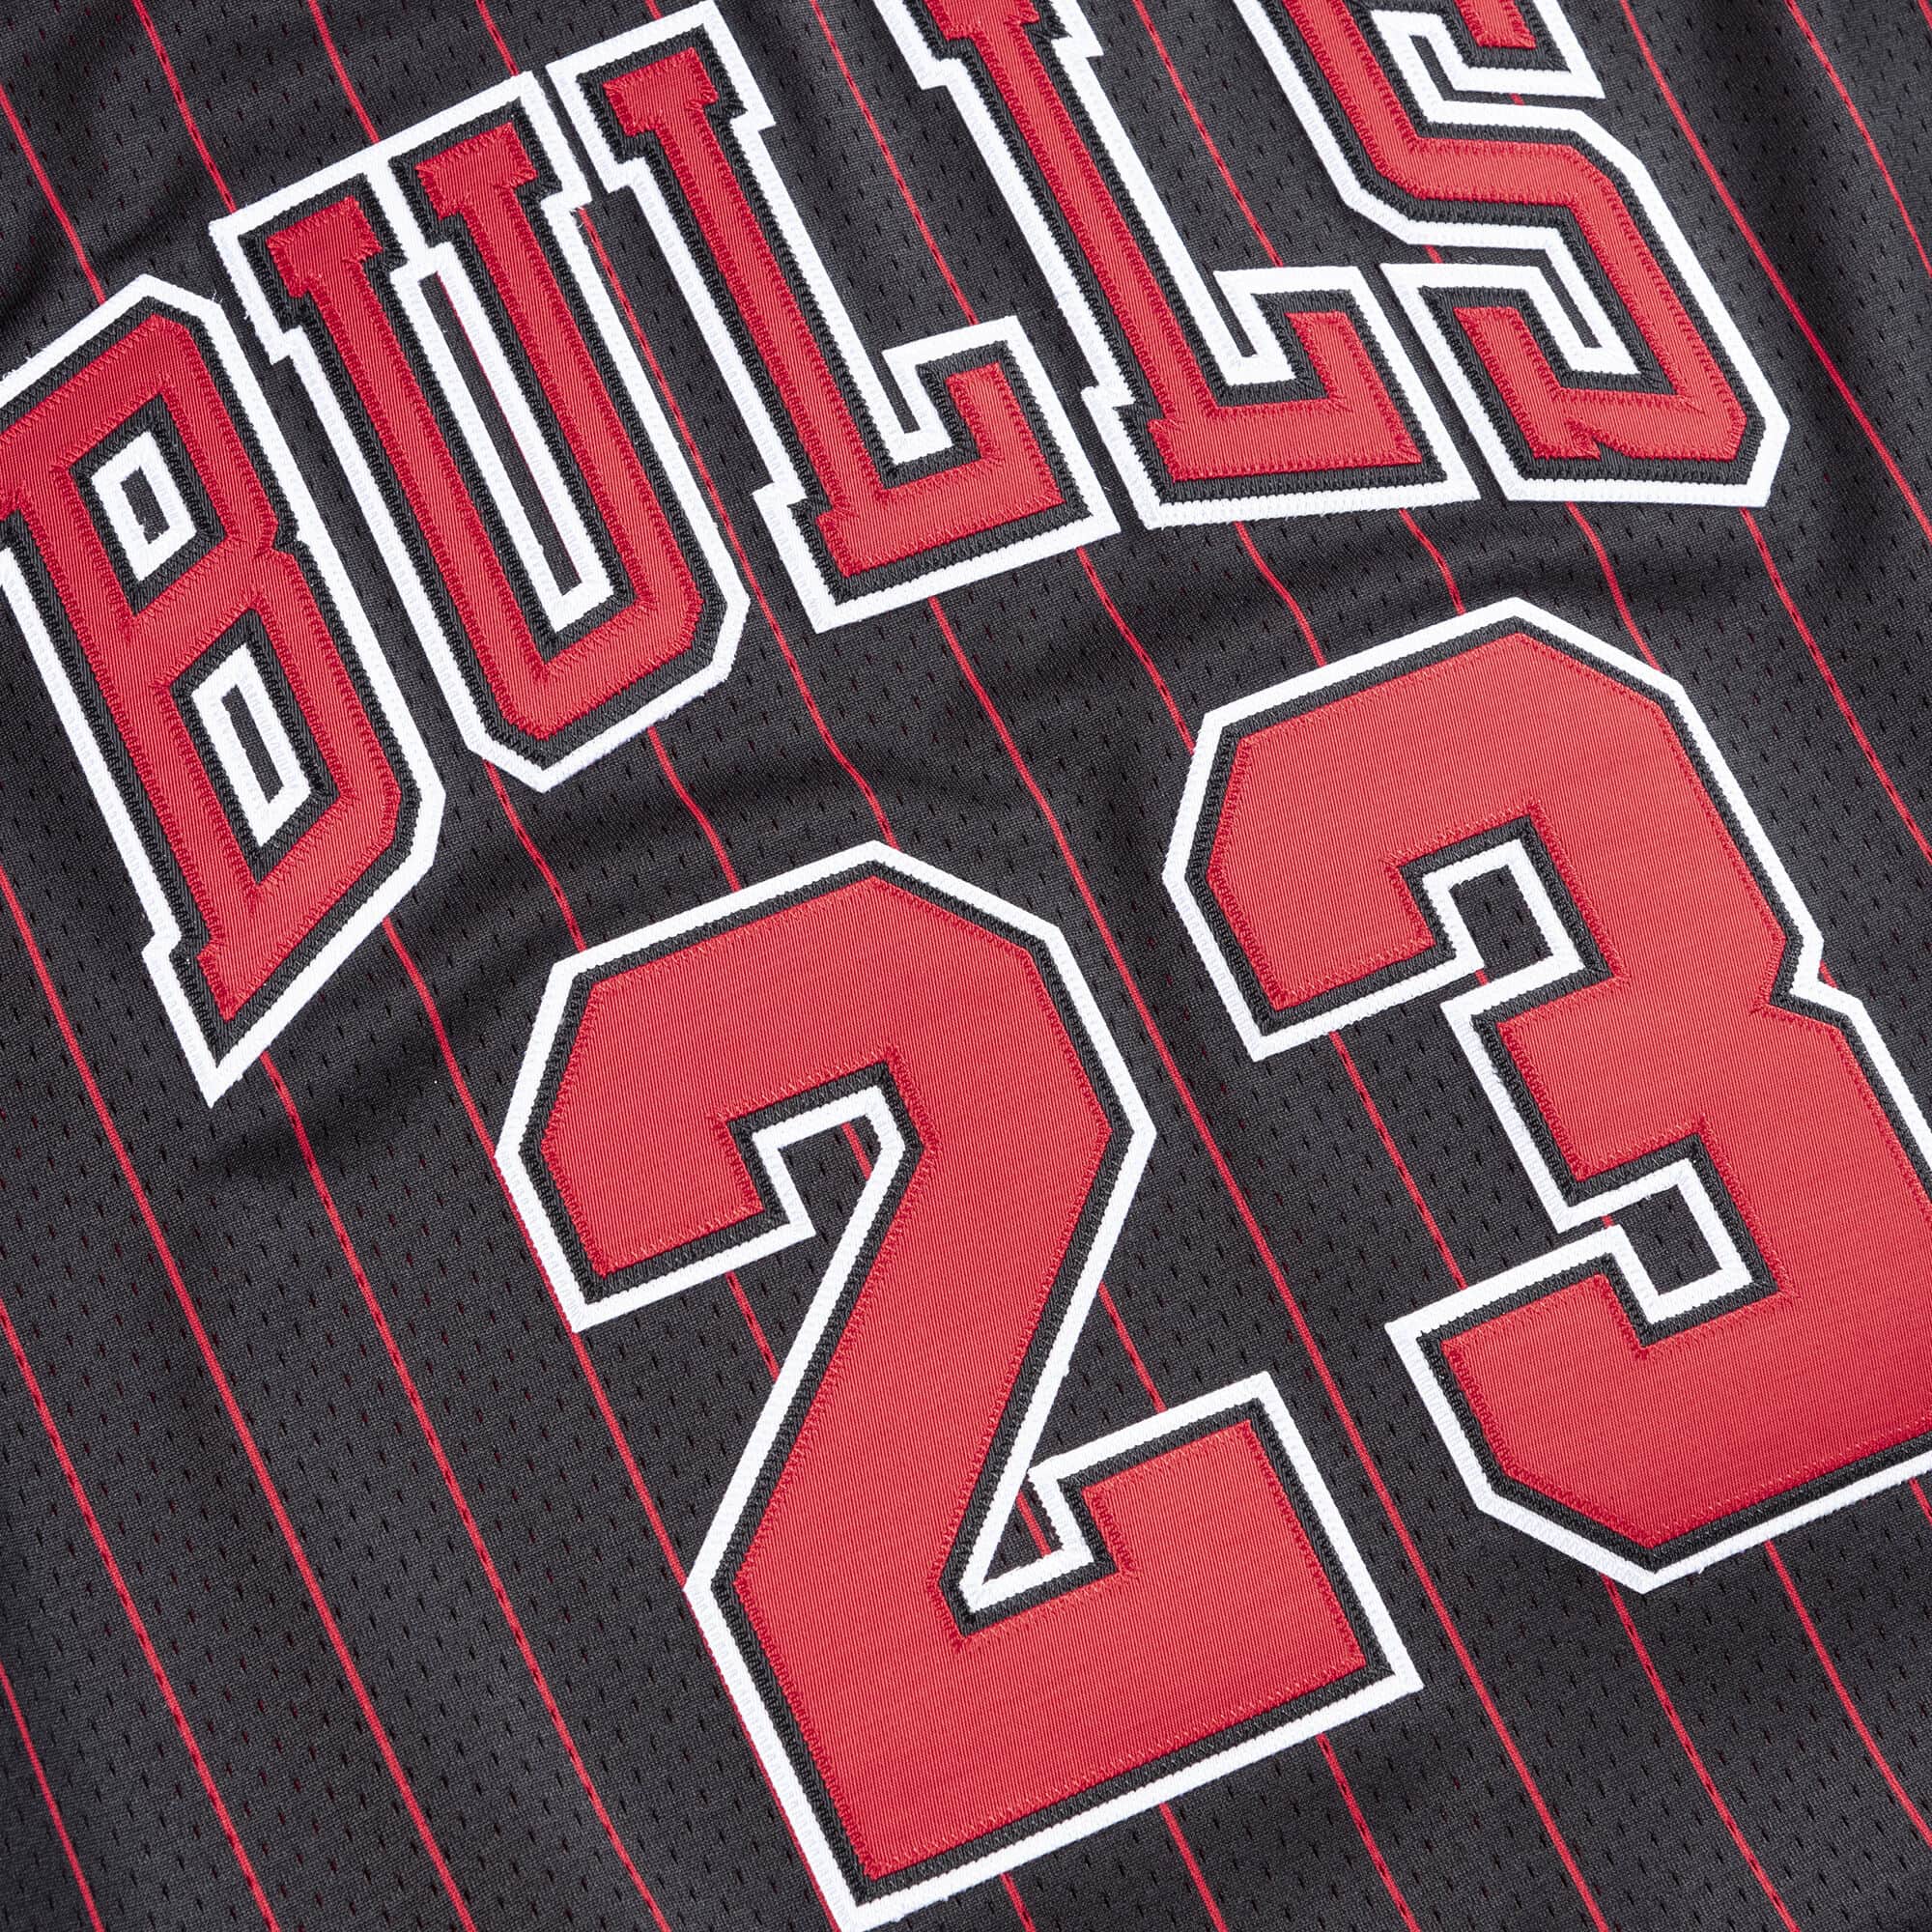 Mitchell+%26+Ness+Michael+Jordan+Chicago+Bulls+Authentic+Jersey+96+97+S+%2836%29  for sale online